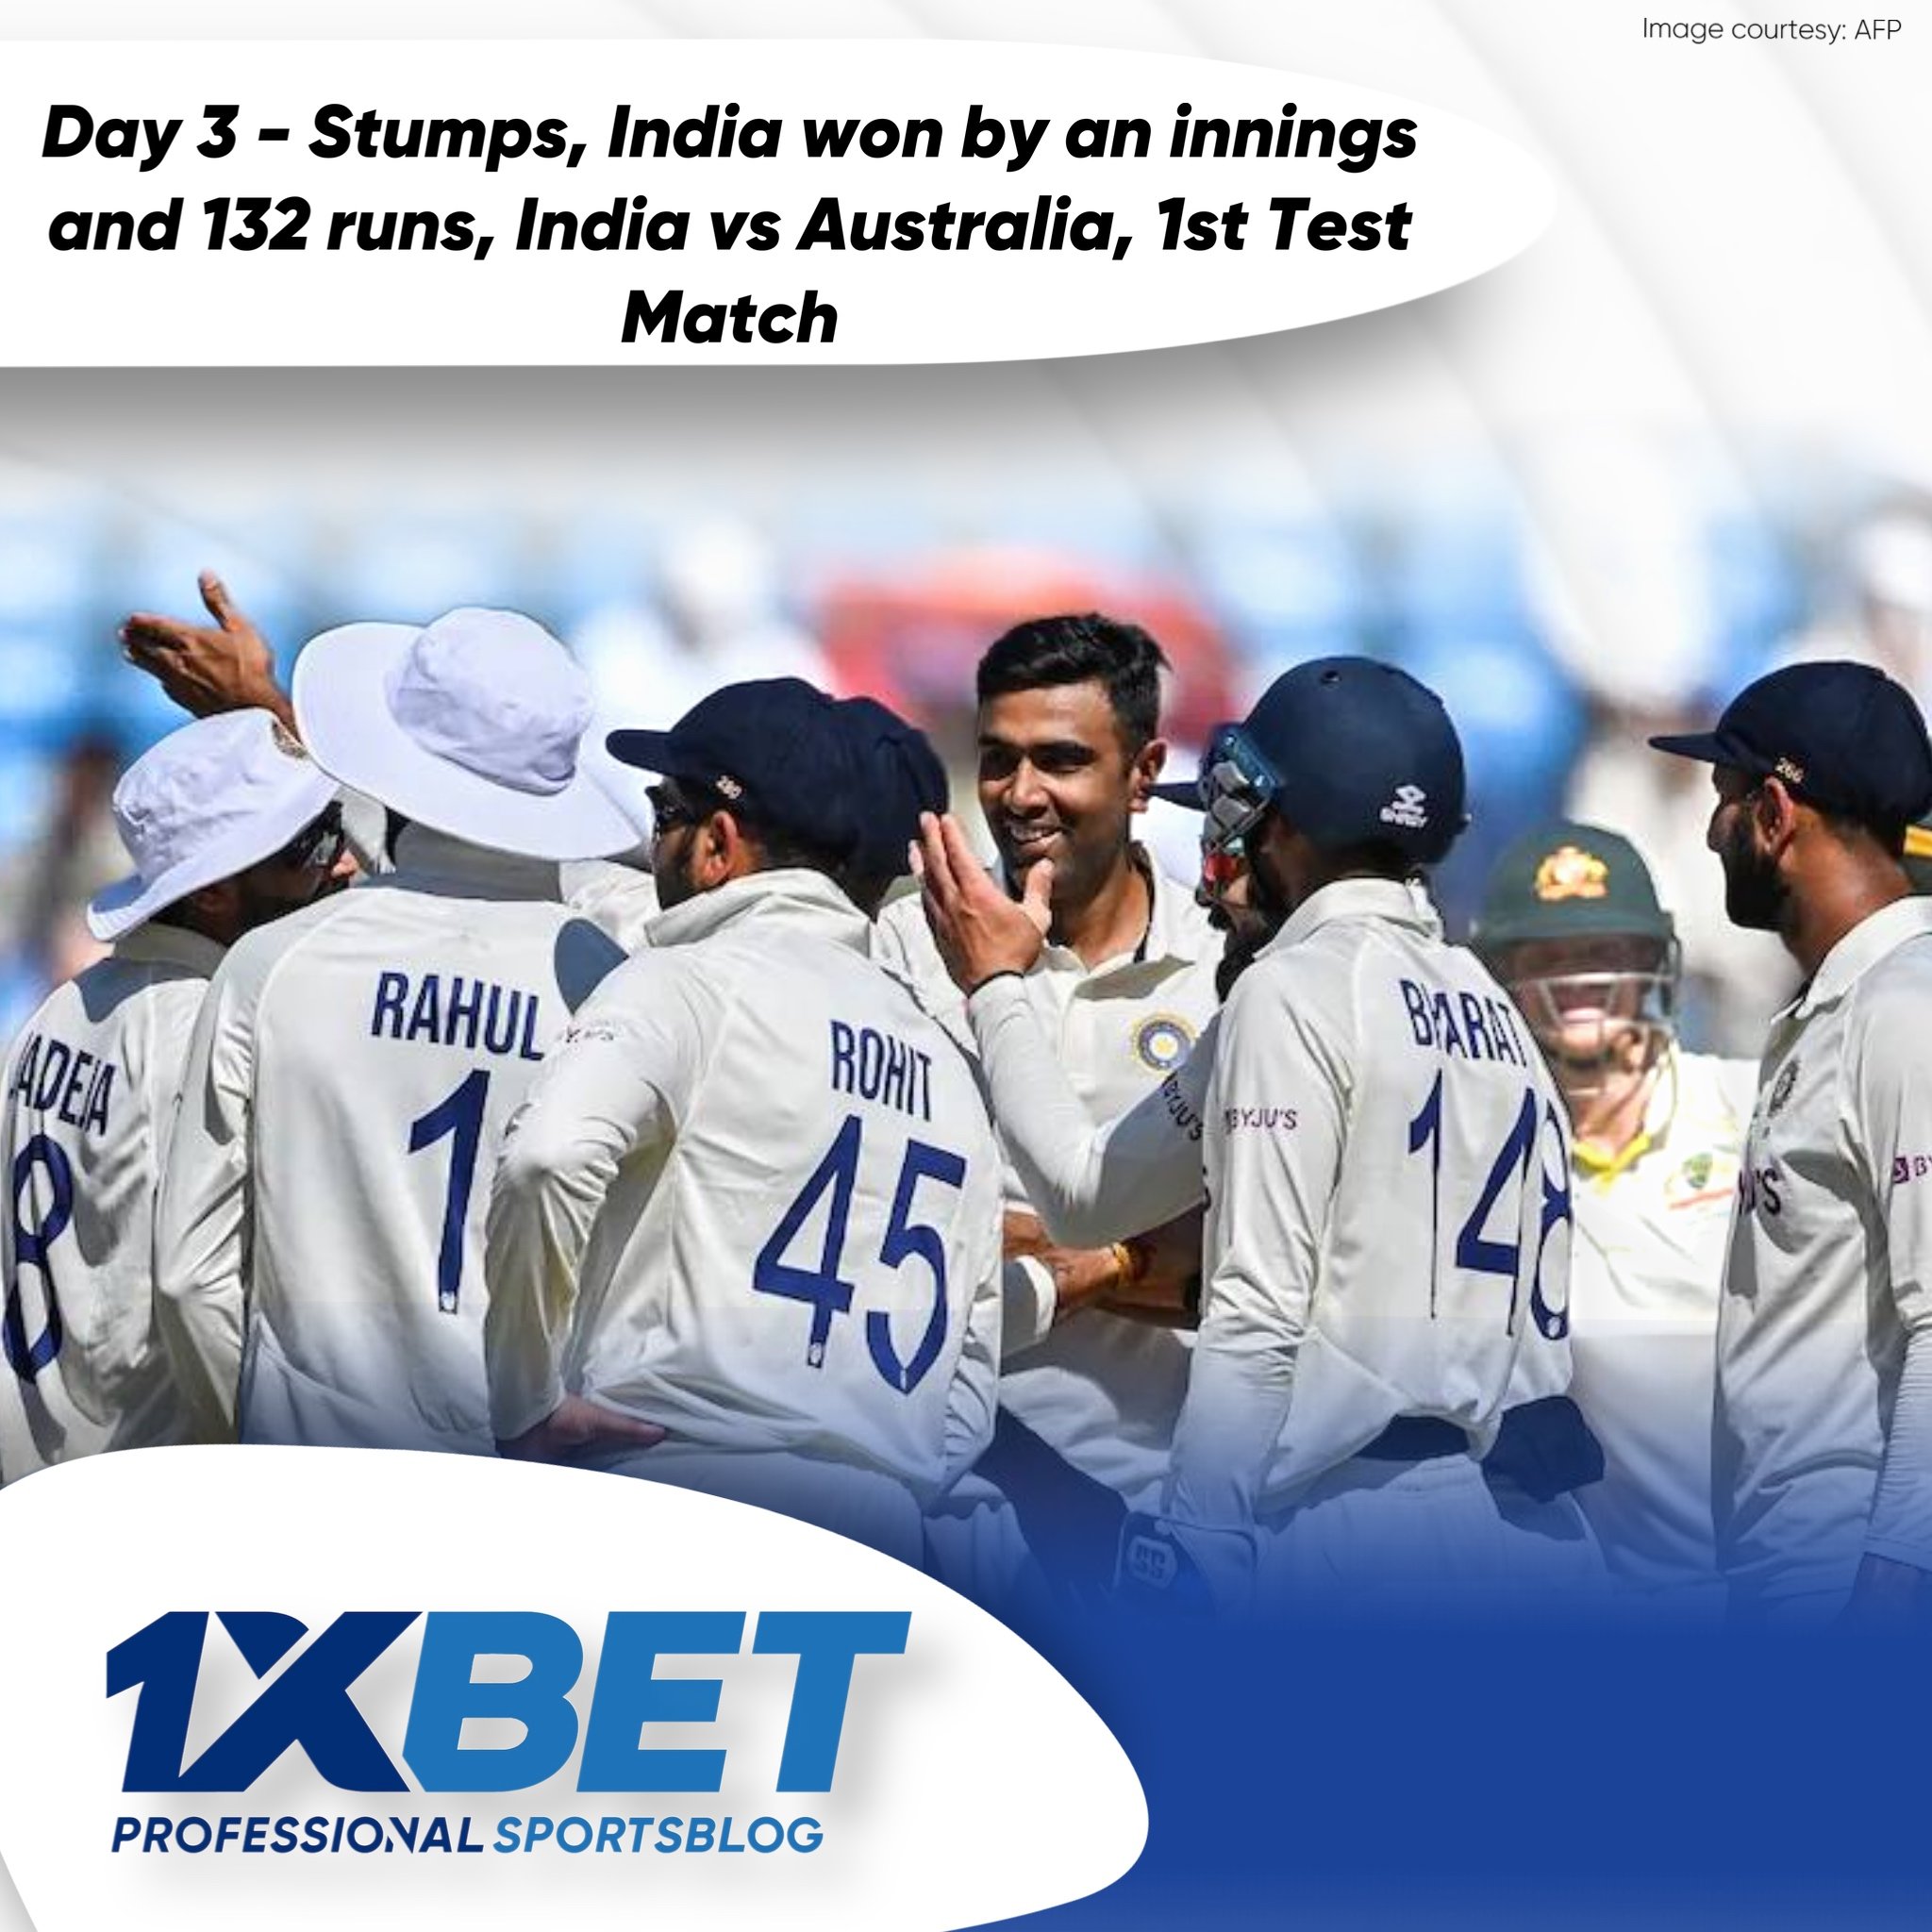 Day 3 - Stumps, India won by an innings and 132 runs